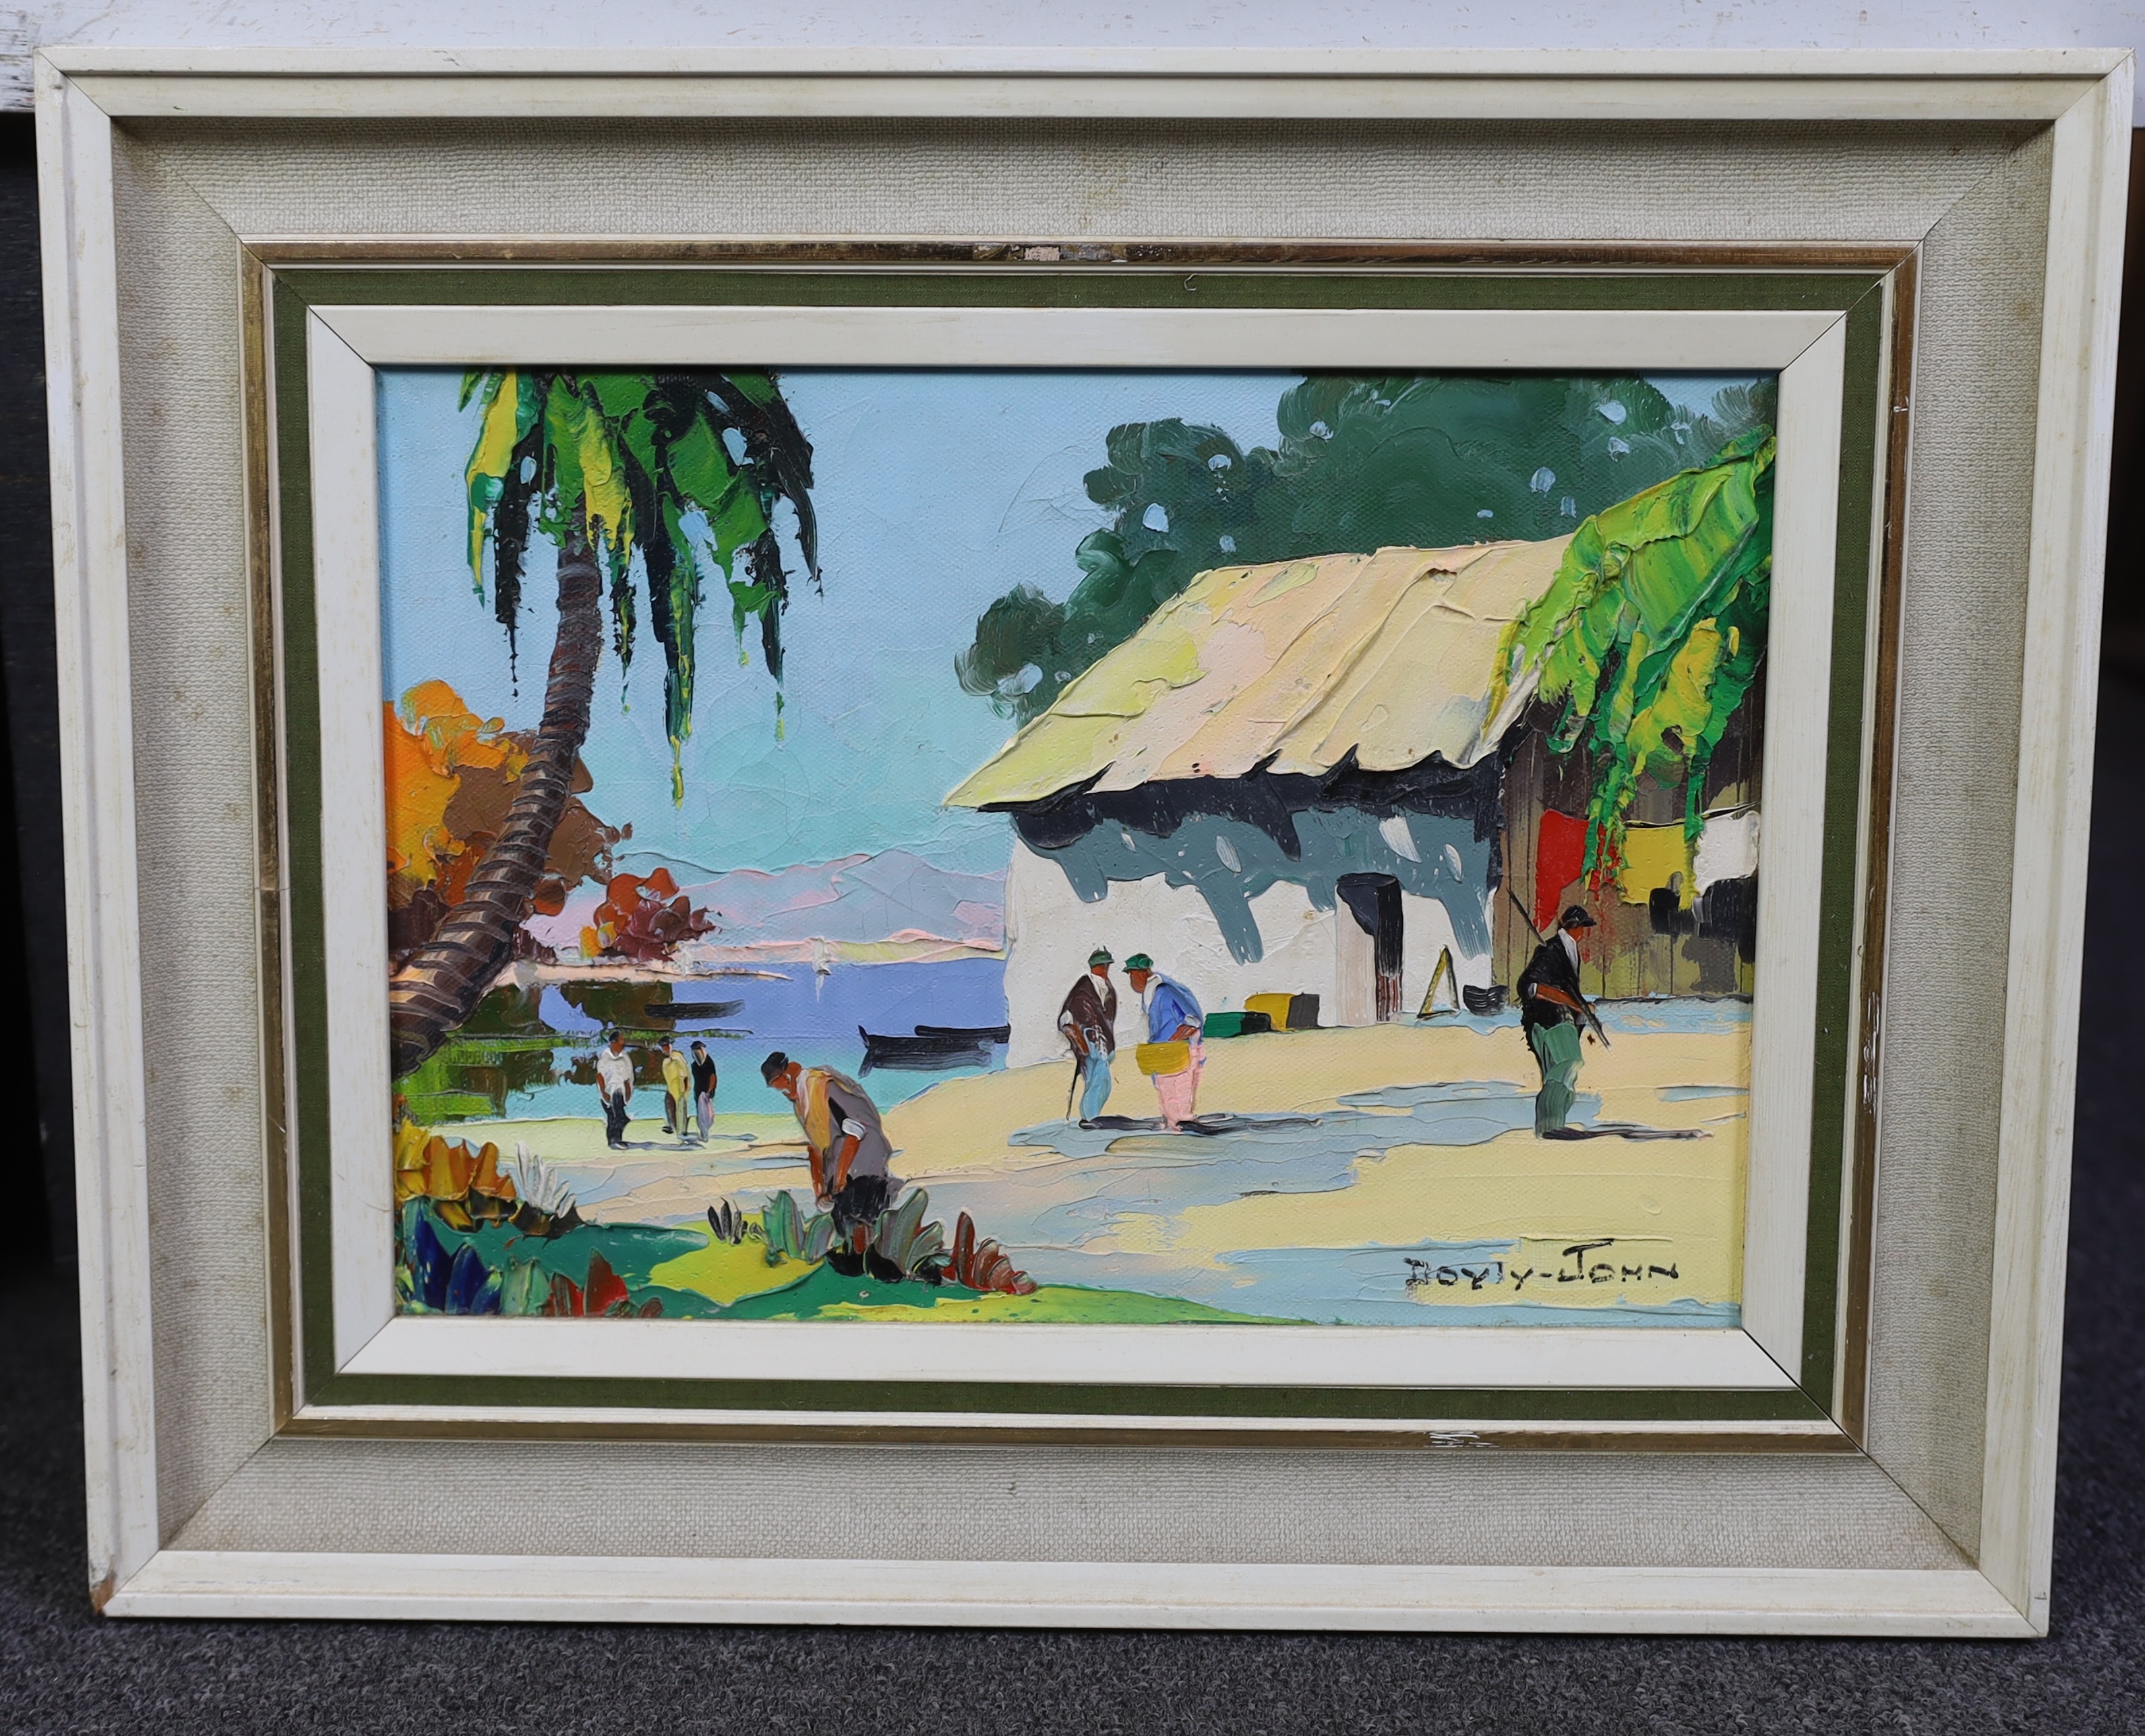 Cecil Rochfort D'Oyly John (English, 1906-1993), Fishing village with figures and palm trees, oil on canvas, 24 x 34cm